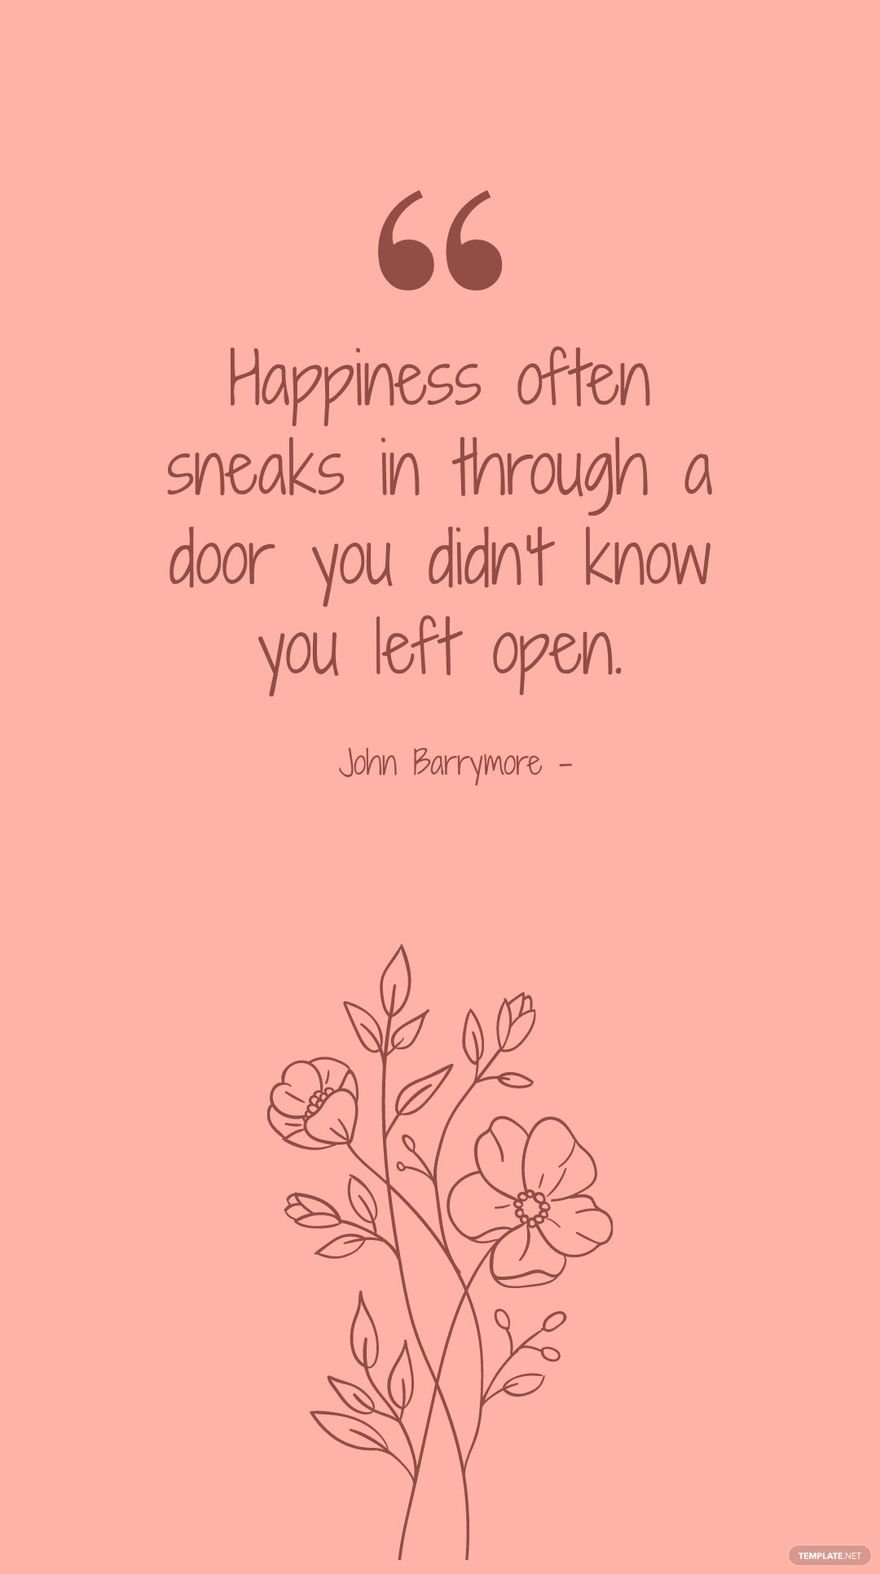 John Barrymore - Happiness often sneaks in through a door you didn't know you left open.